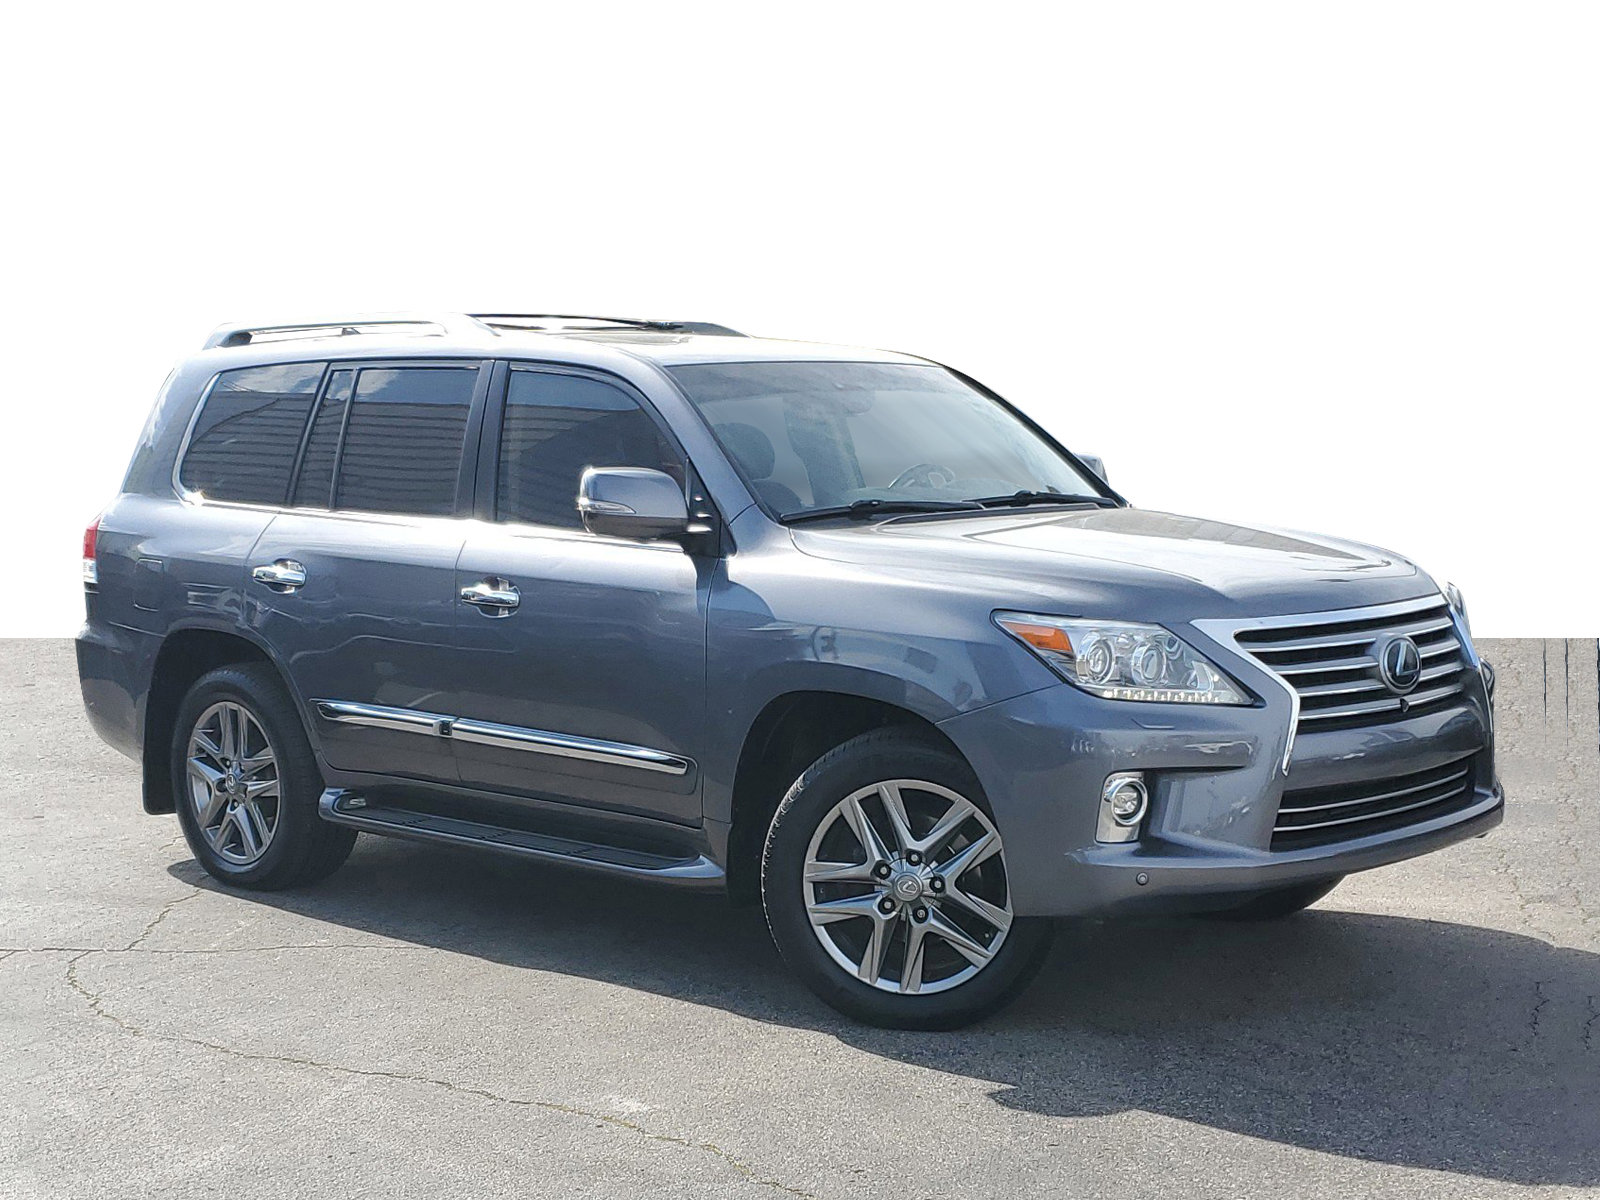 Pre-Owned 2015 Lexus LX 570 570 Sport Utility in Nashville #TF4168814 |  Beaman Buick GMC